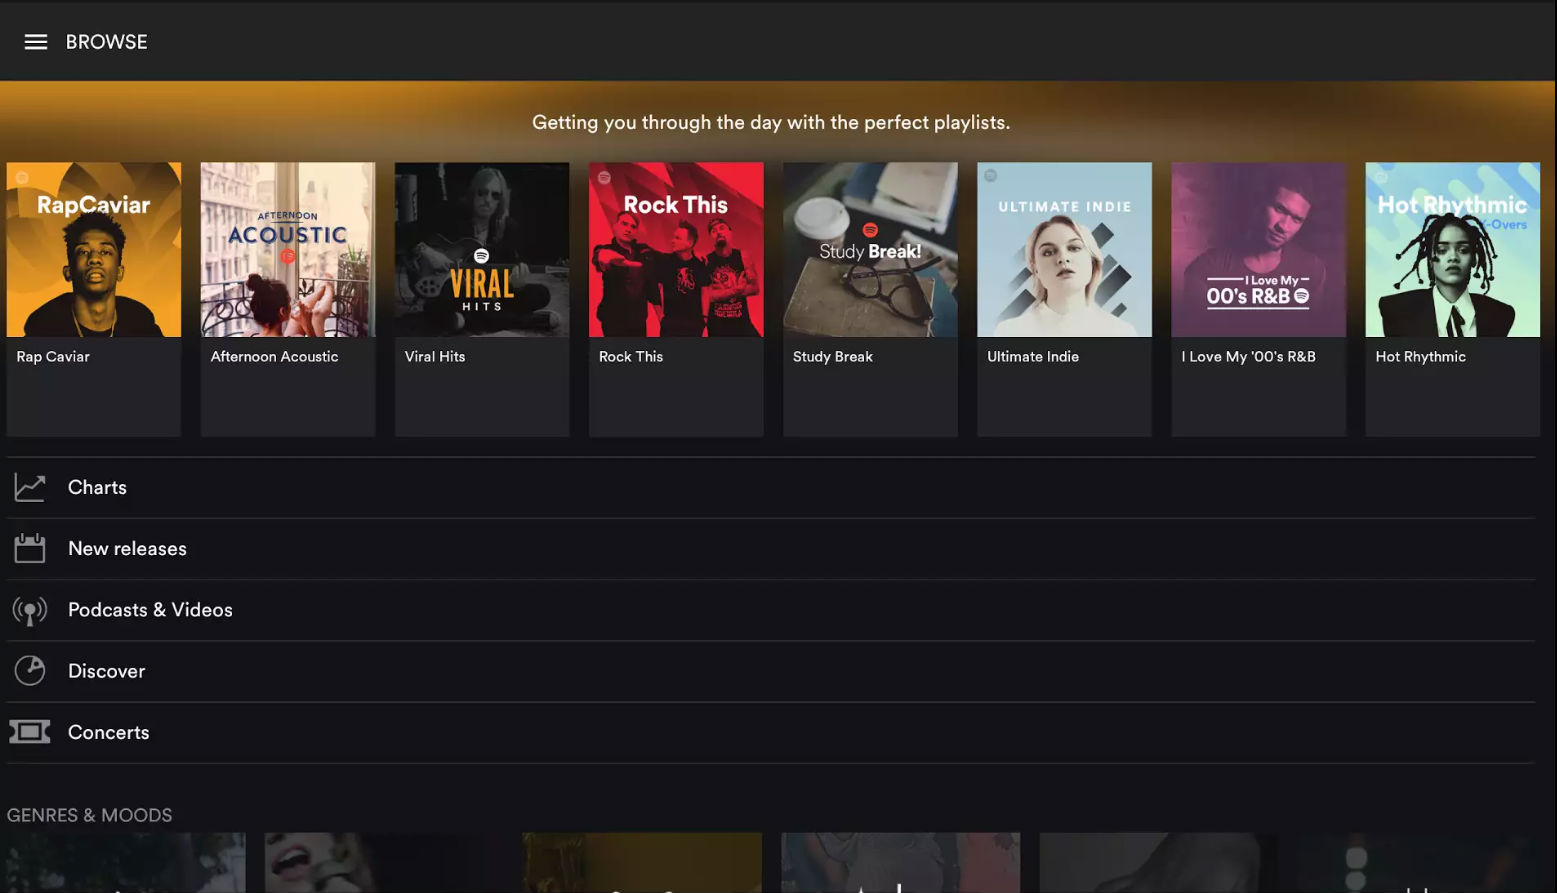 spotify for chromebook